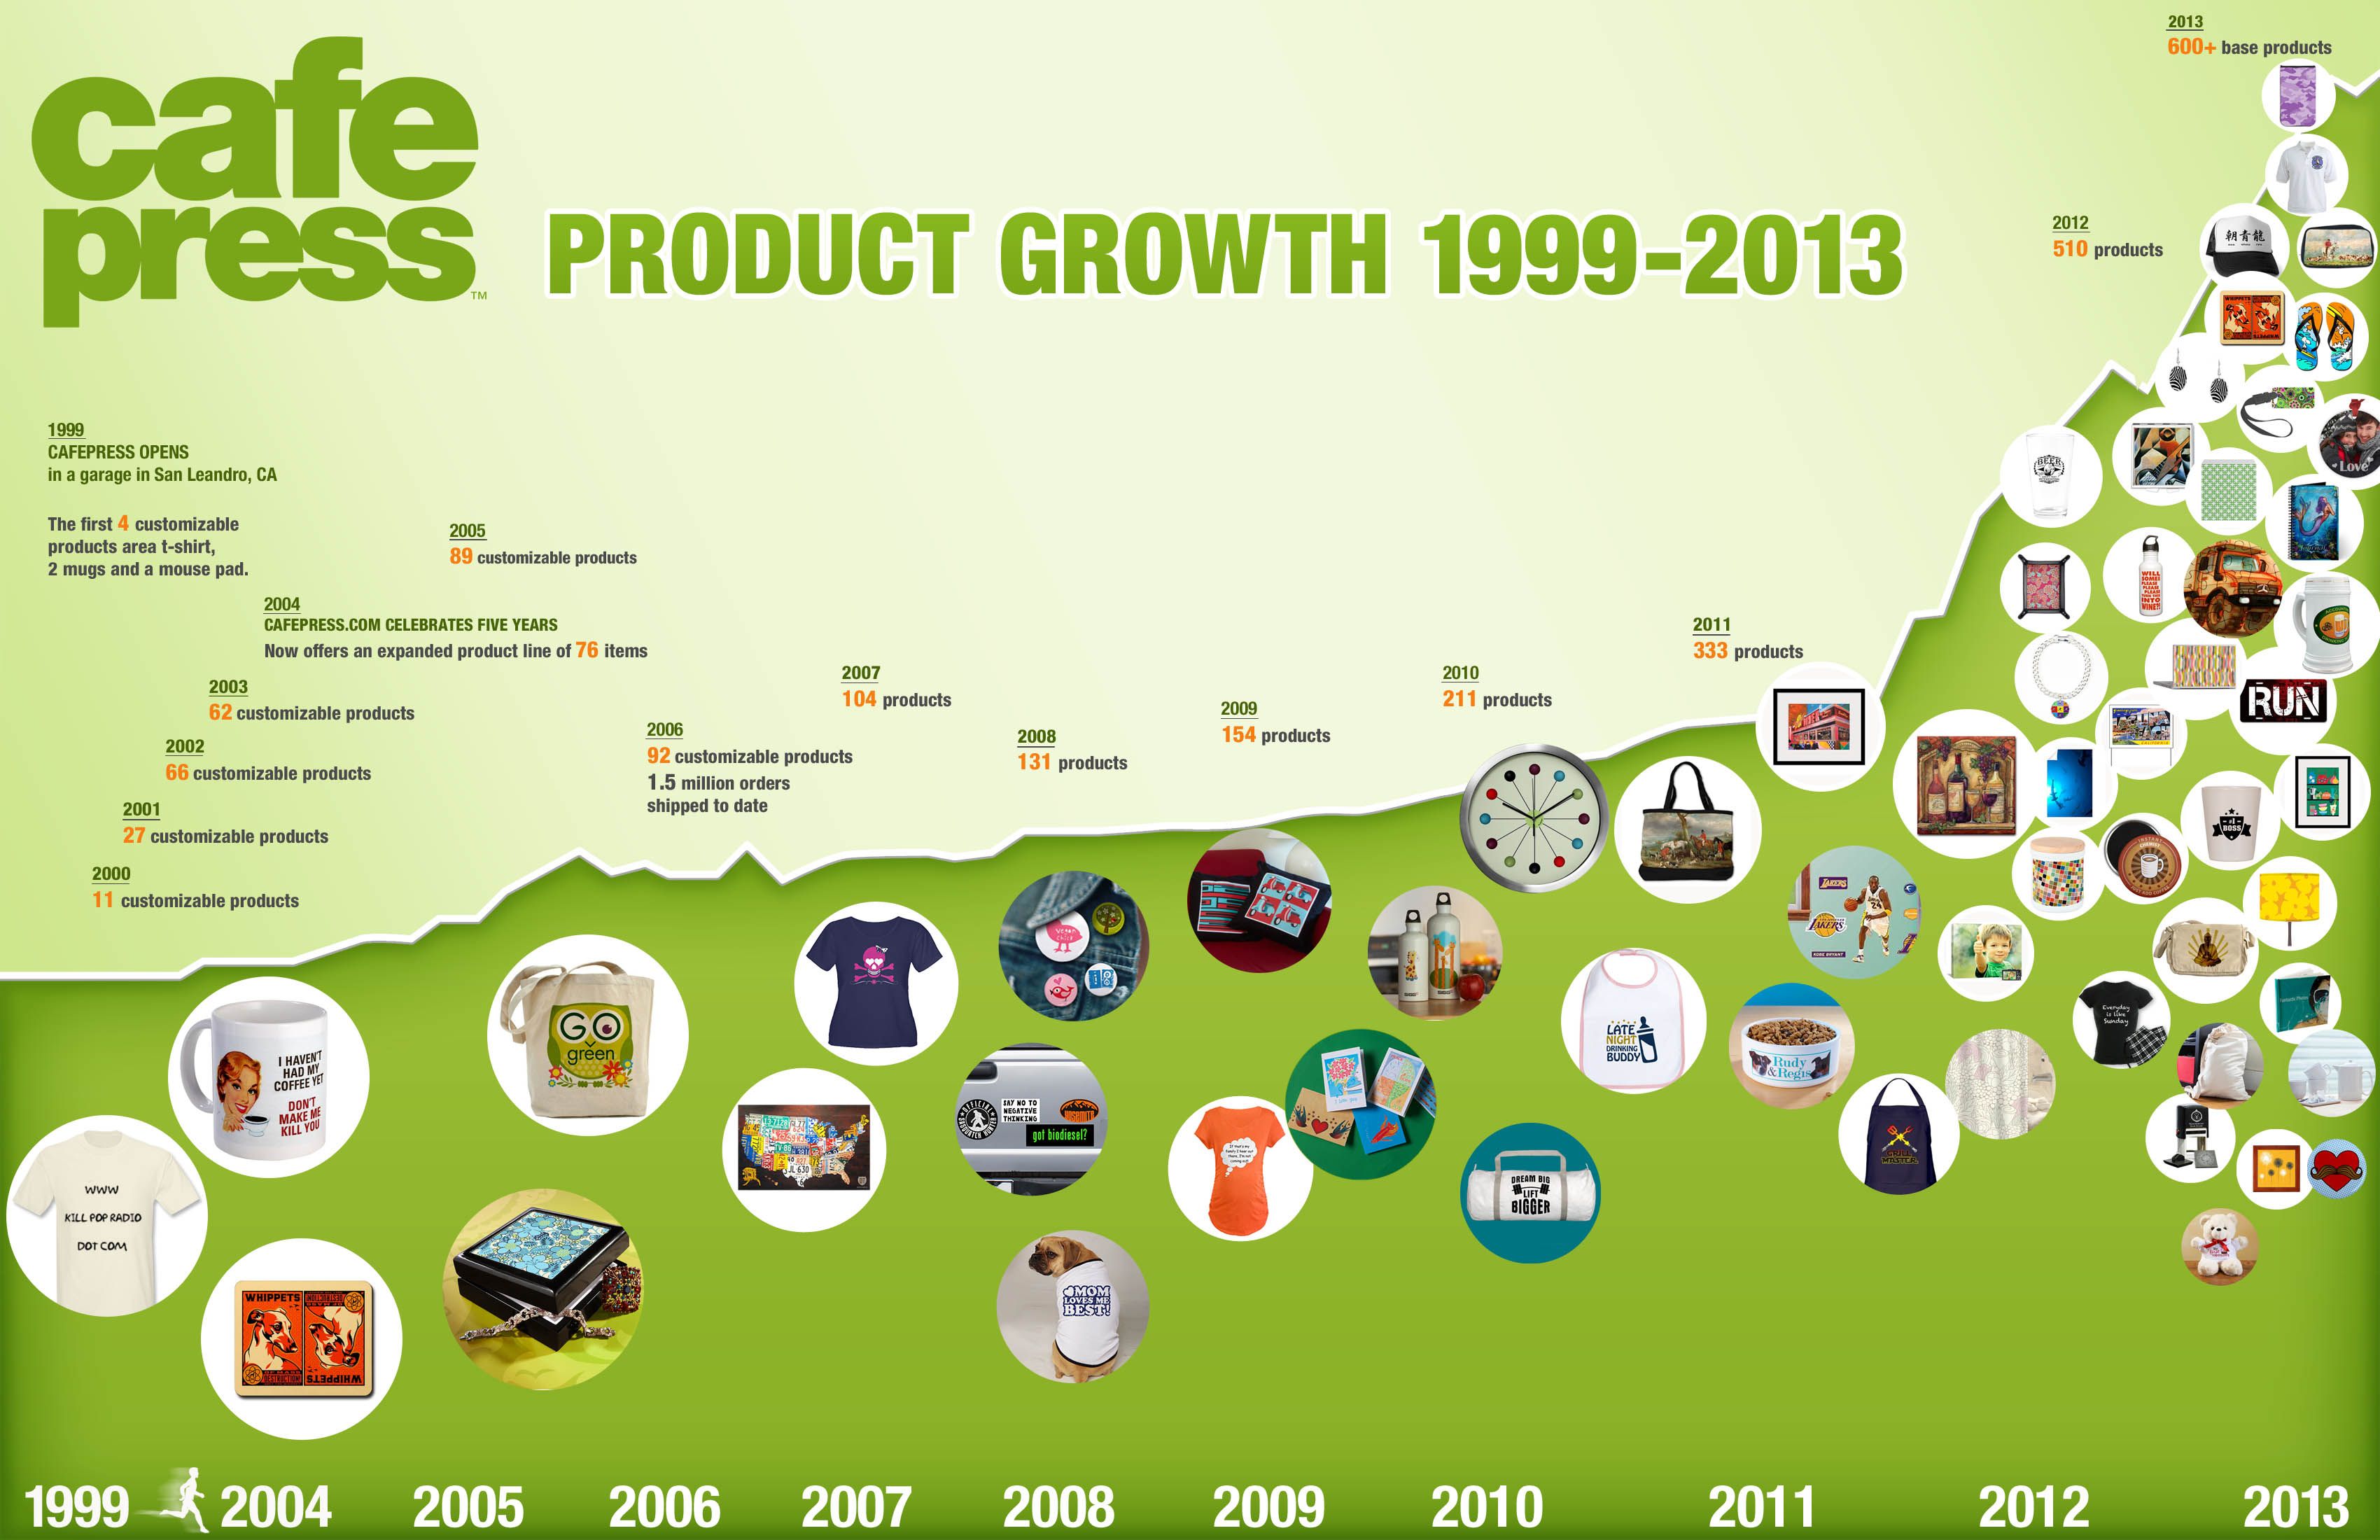 CafePress Product Growth 1999-2013